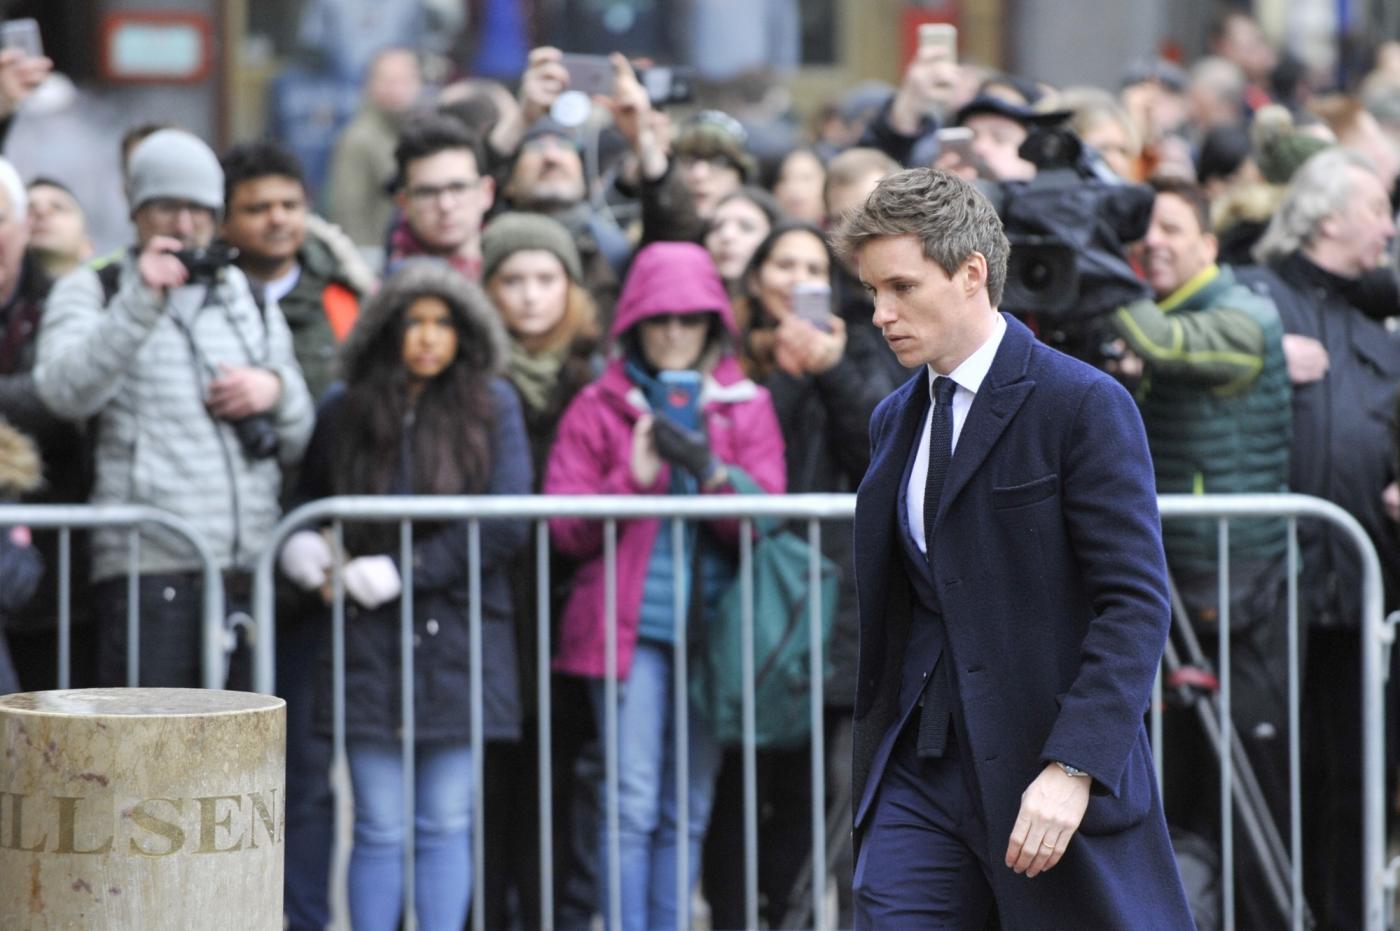 CAMBRIDGE, March 31, 2018 (Xinhua) -- Actor Eddie Redmayne, who played the role of British physicist Stephen Hawking in the film "The Theory of Everything", attends the private funeral of Stephen Hawking at the Great St Mary's Church in Cambridge, Britain, on March 31, 2018. The funeral of Professor Stephen Hawking was held Saturday at a church near the Cambridge University college where he was a fellow for more than half a century. (Xinhua/Stephen Chung/IANS) by .